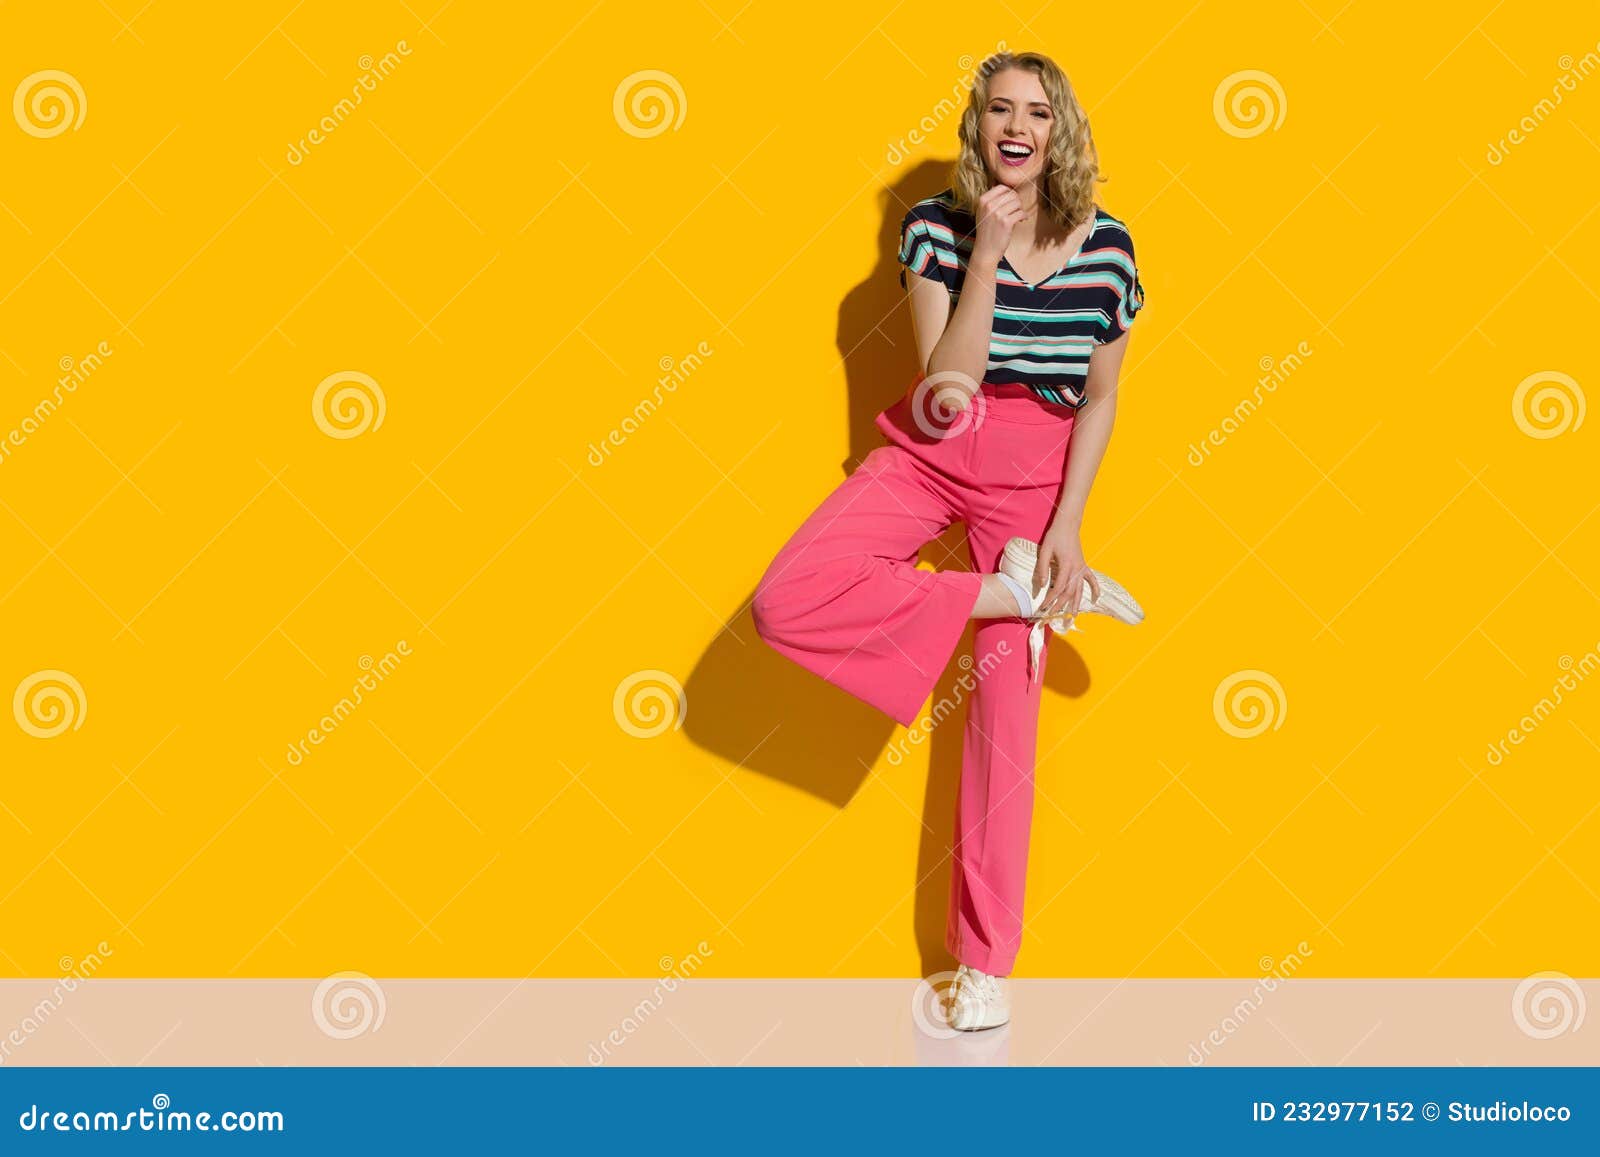 laughing young woman in pink high waisted baggy pants and sneakers is posing on one leg in front of yellow wall